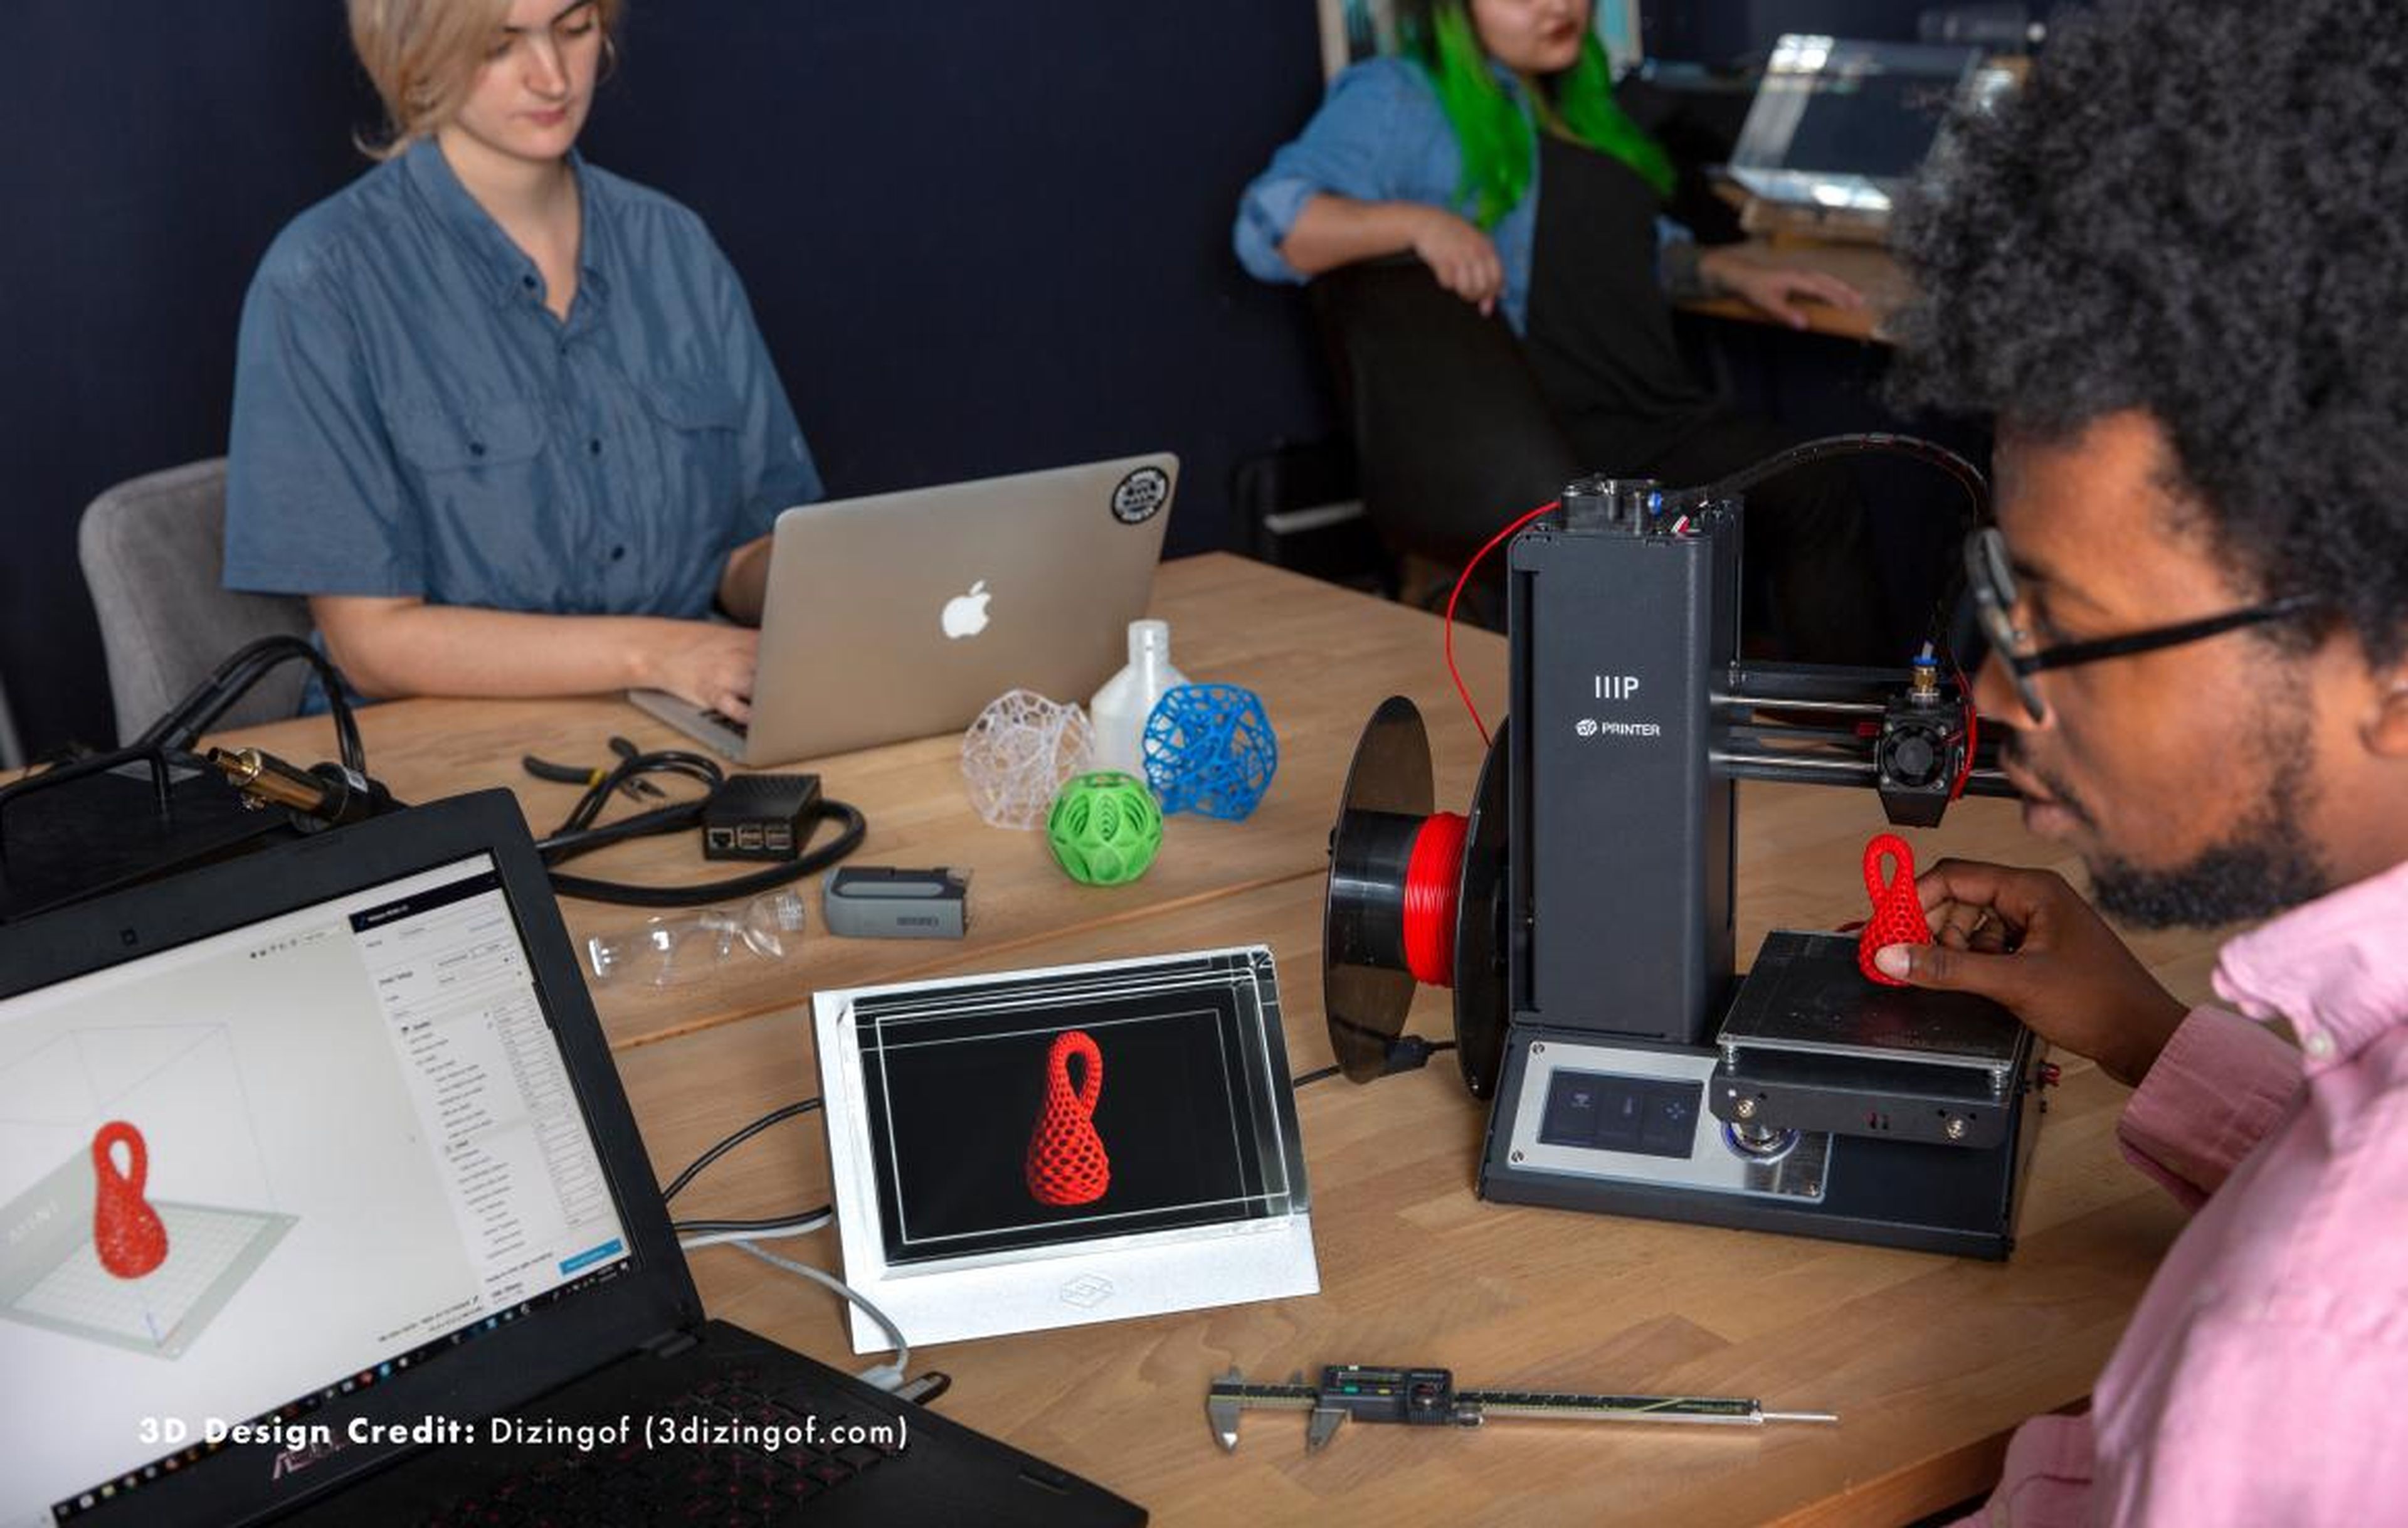 ... and 3D printing experts are among the first early adopters to try the technology out.